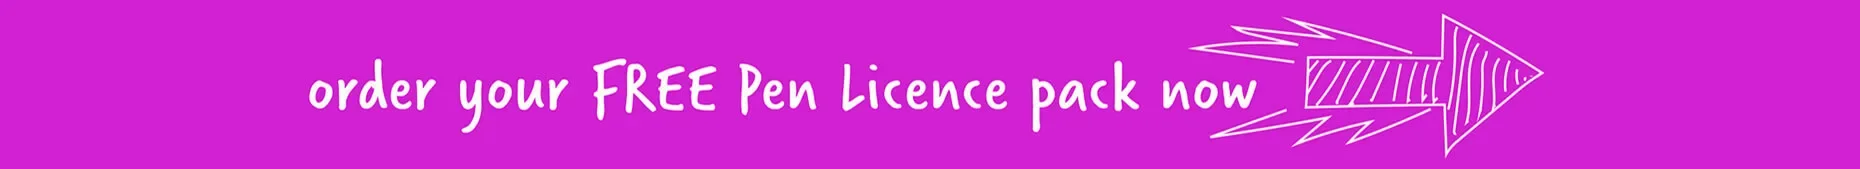 order your free Penc Licence pack now